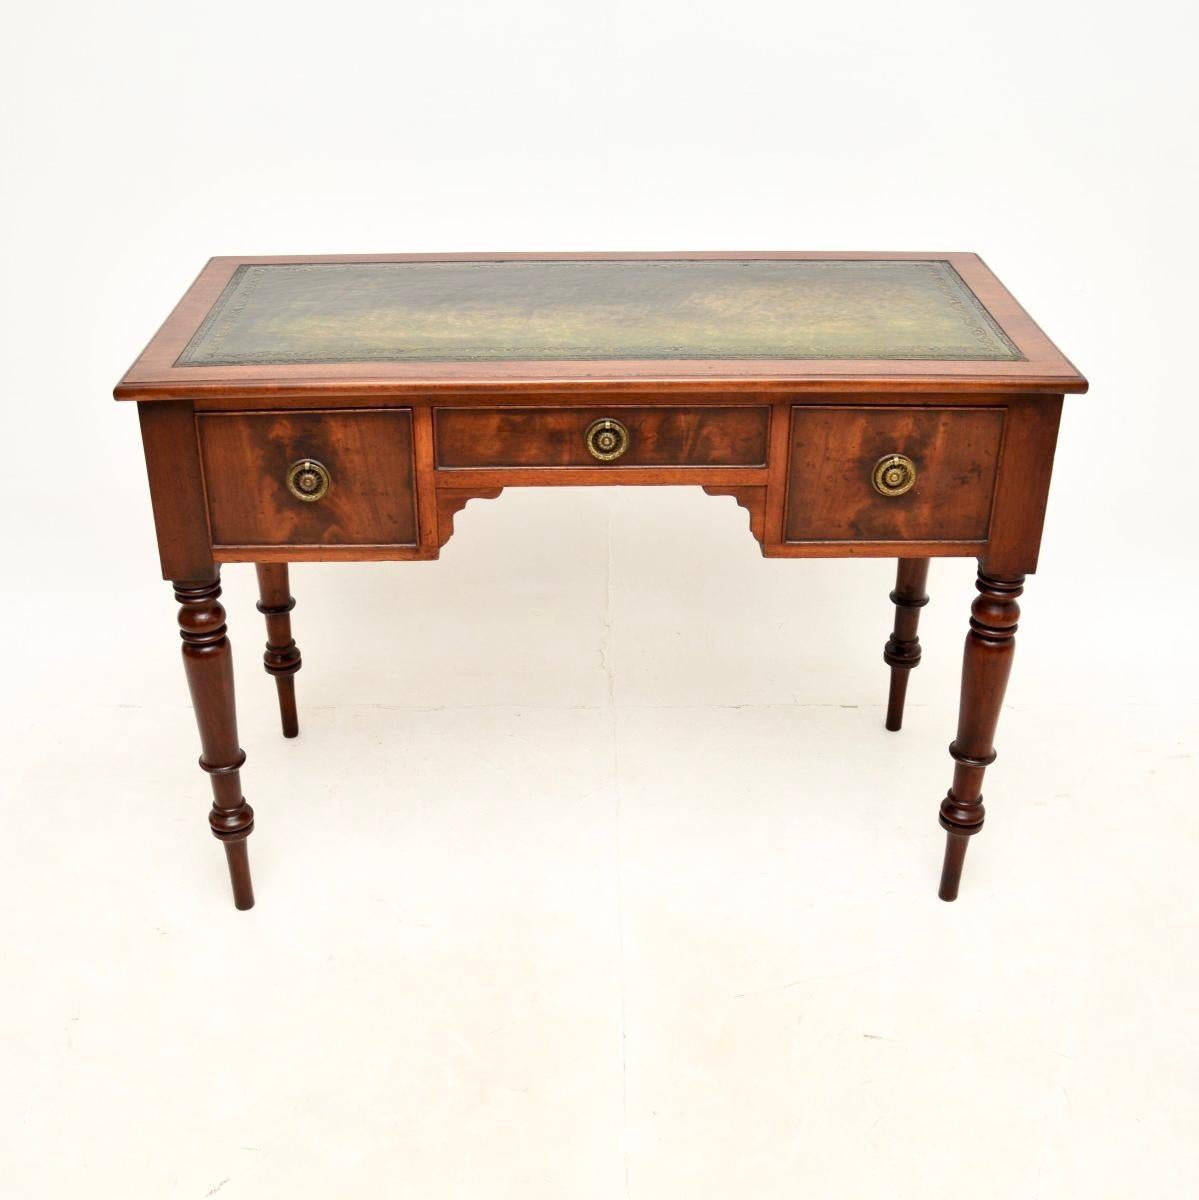 A charming and very well made antique Georgian writing table / desk. This was made in England, we would date it to around the 1800-1820 period.

It is of superb quality, this is a very useful and practical size. It sits on beautifully turned legs,